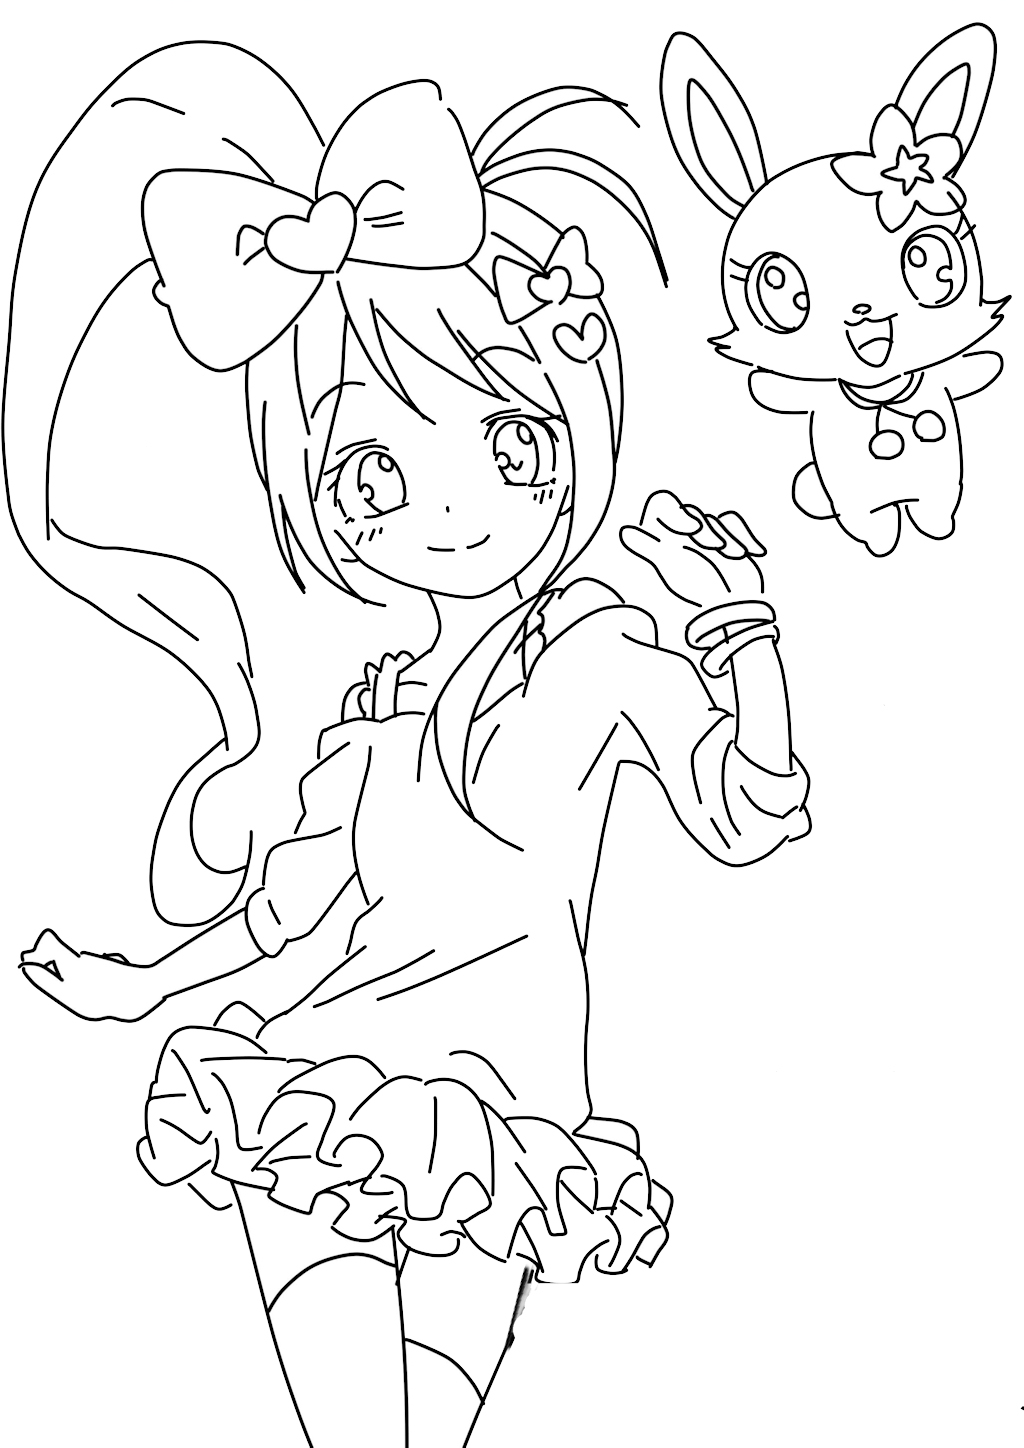 Drawing Jewelpet #37678 (Cartoons) – Printable coloring pages